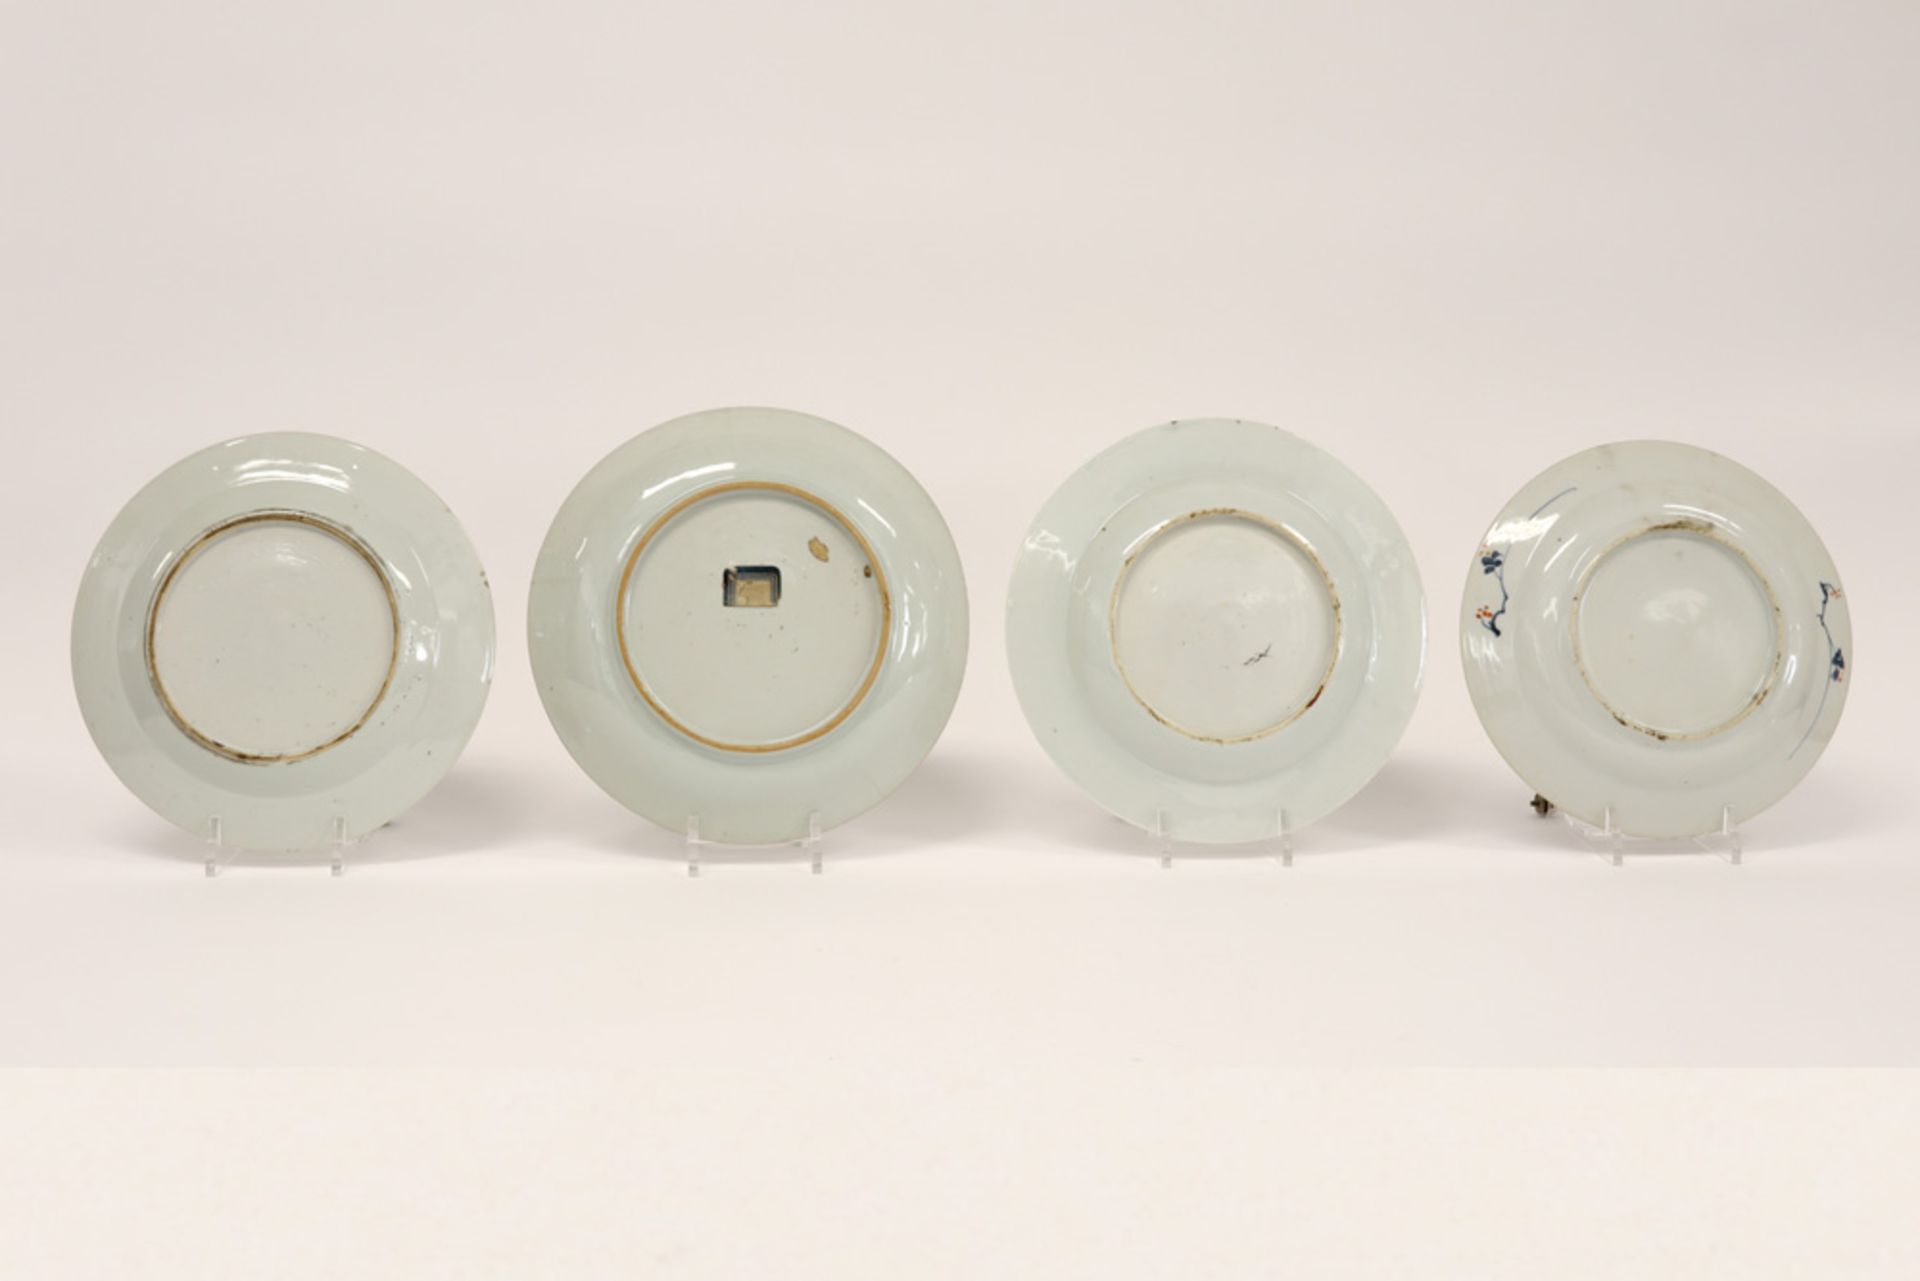 four 18th Cent. Chinese plates in porcelain, three with an Imari and one with a 'Famille Rose' decor - Image 2 of 2